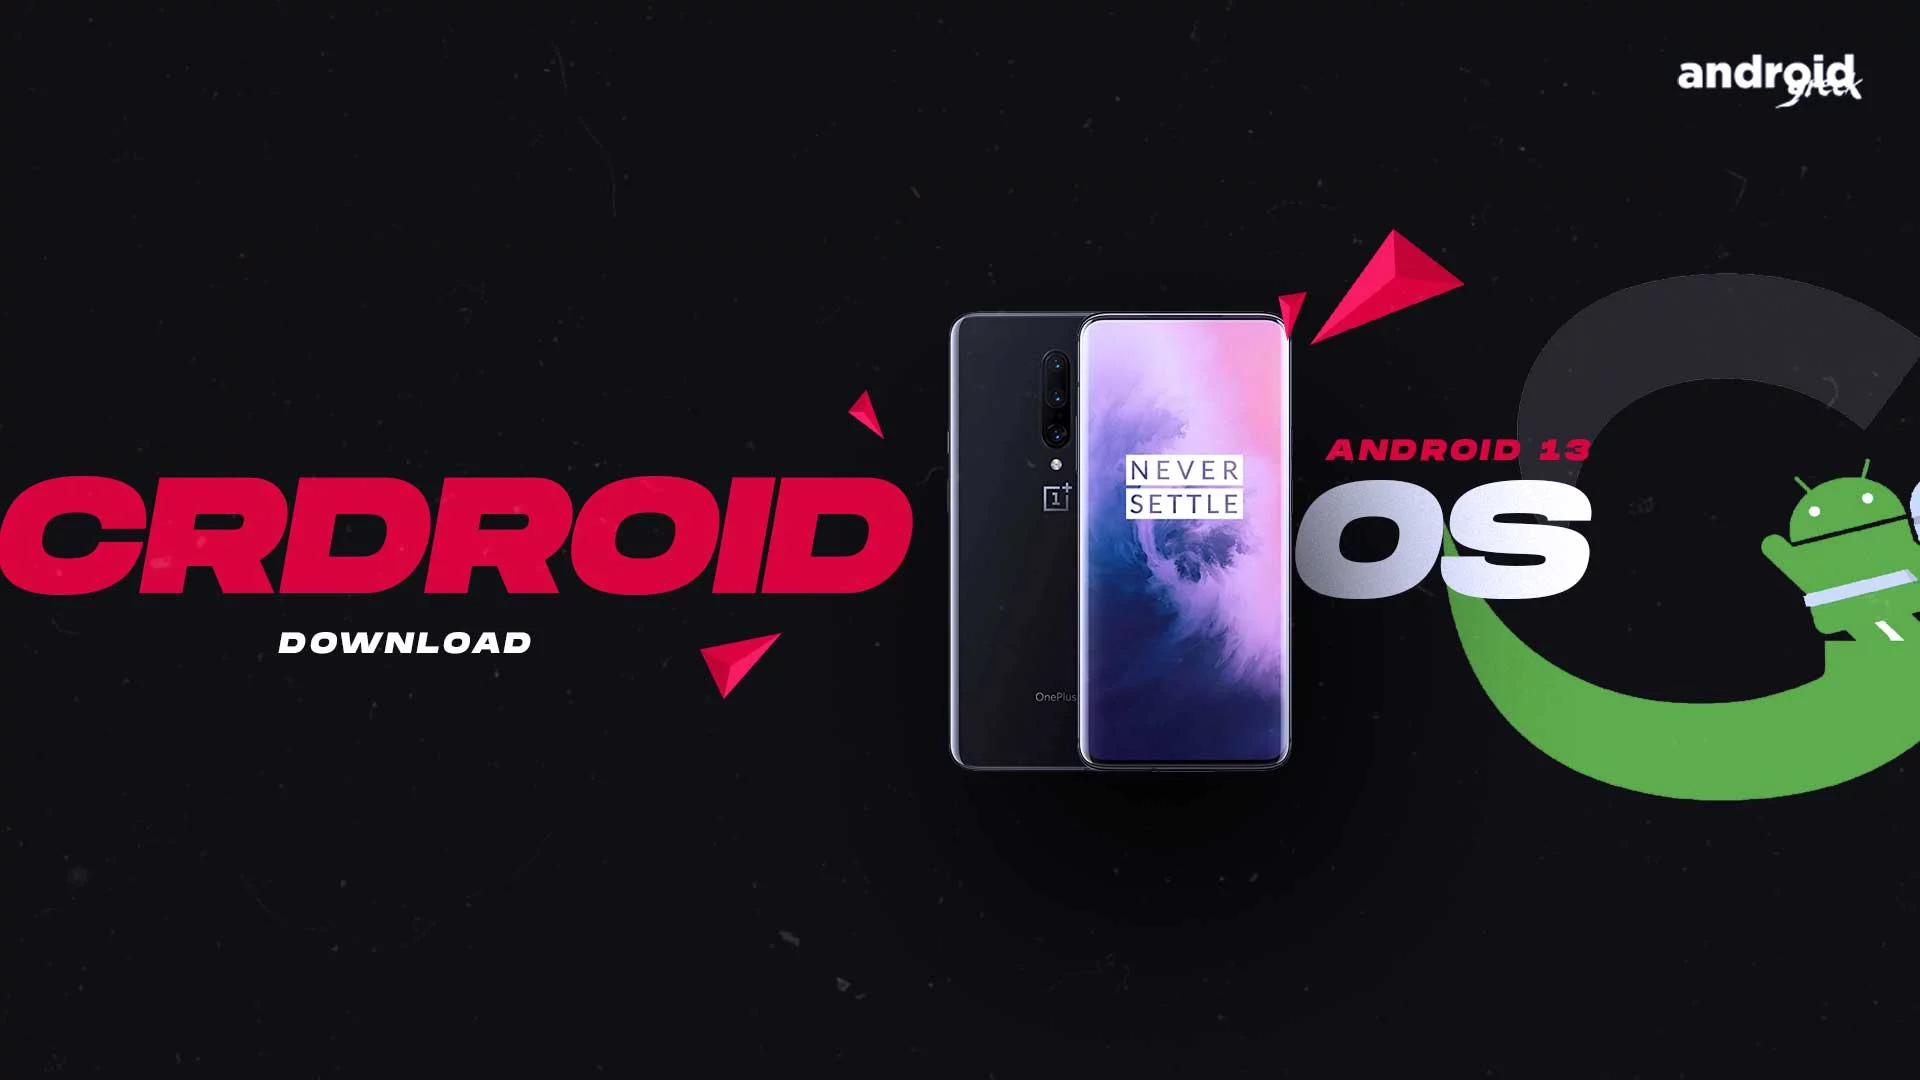 Downloads Android 13 crDroid  for OnePlus 7 Pro (guacamole)